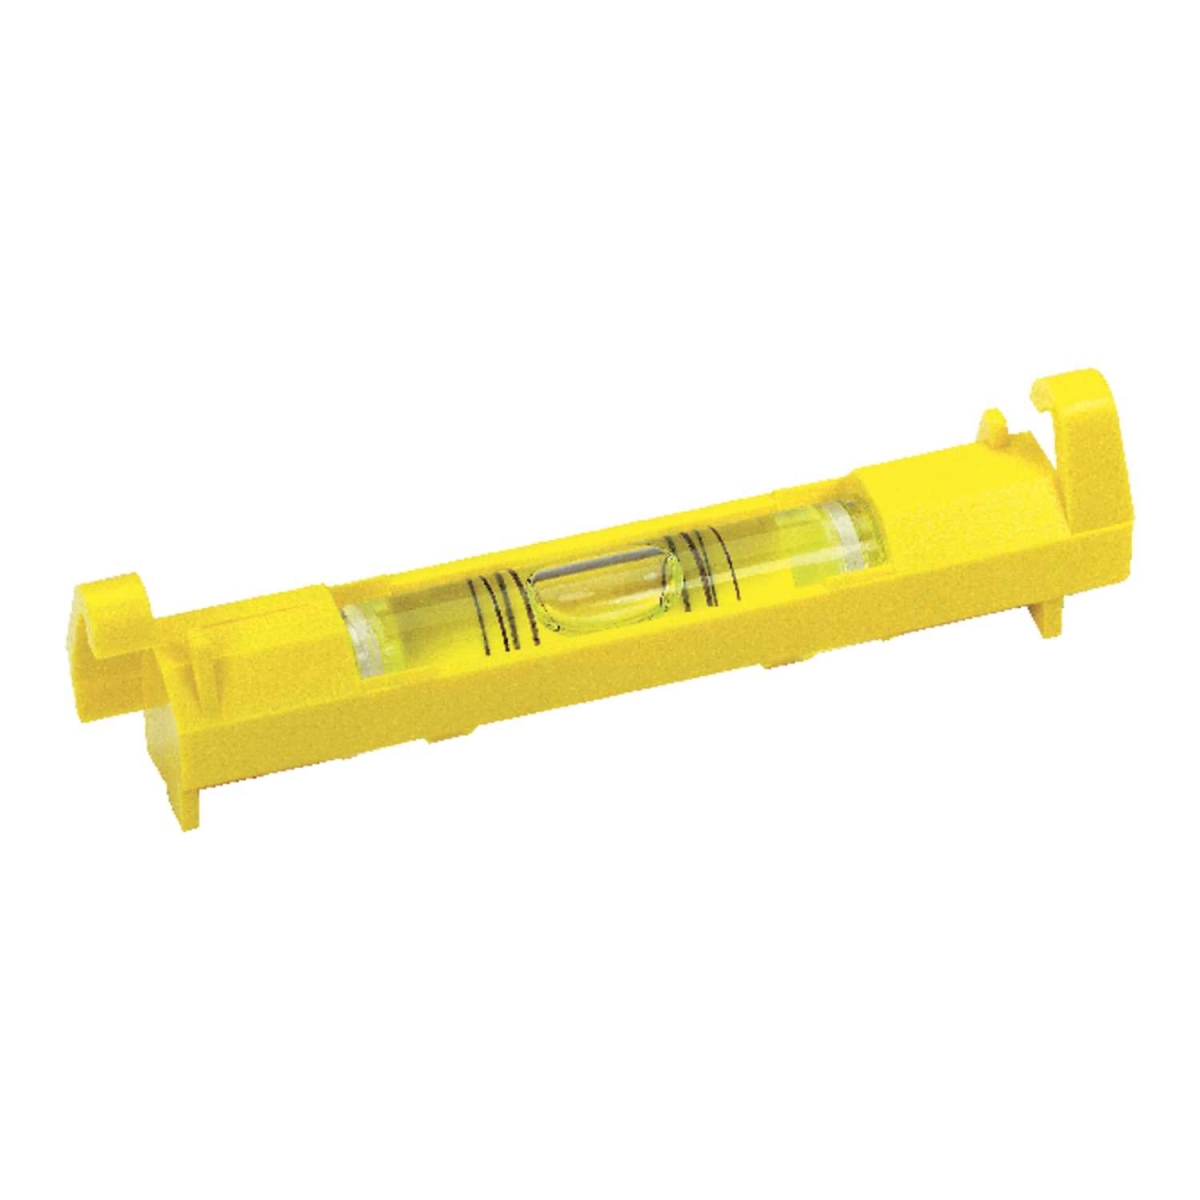 42193 Line Level - High Visibility Plastic - 3.09 In.